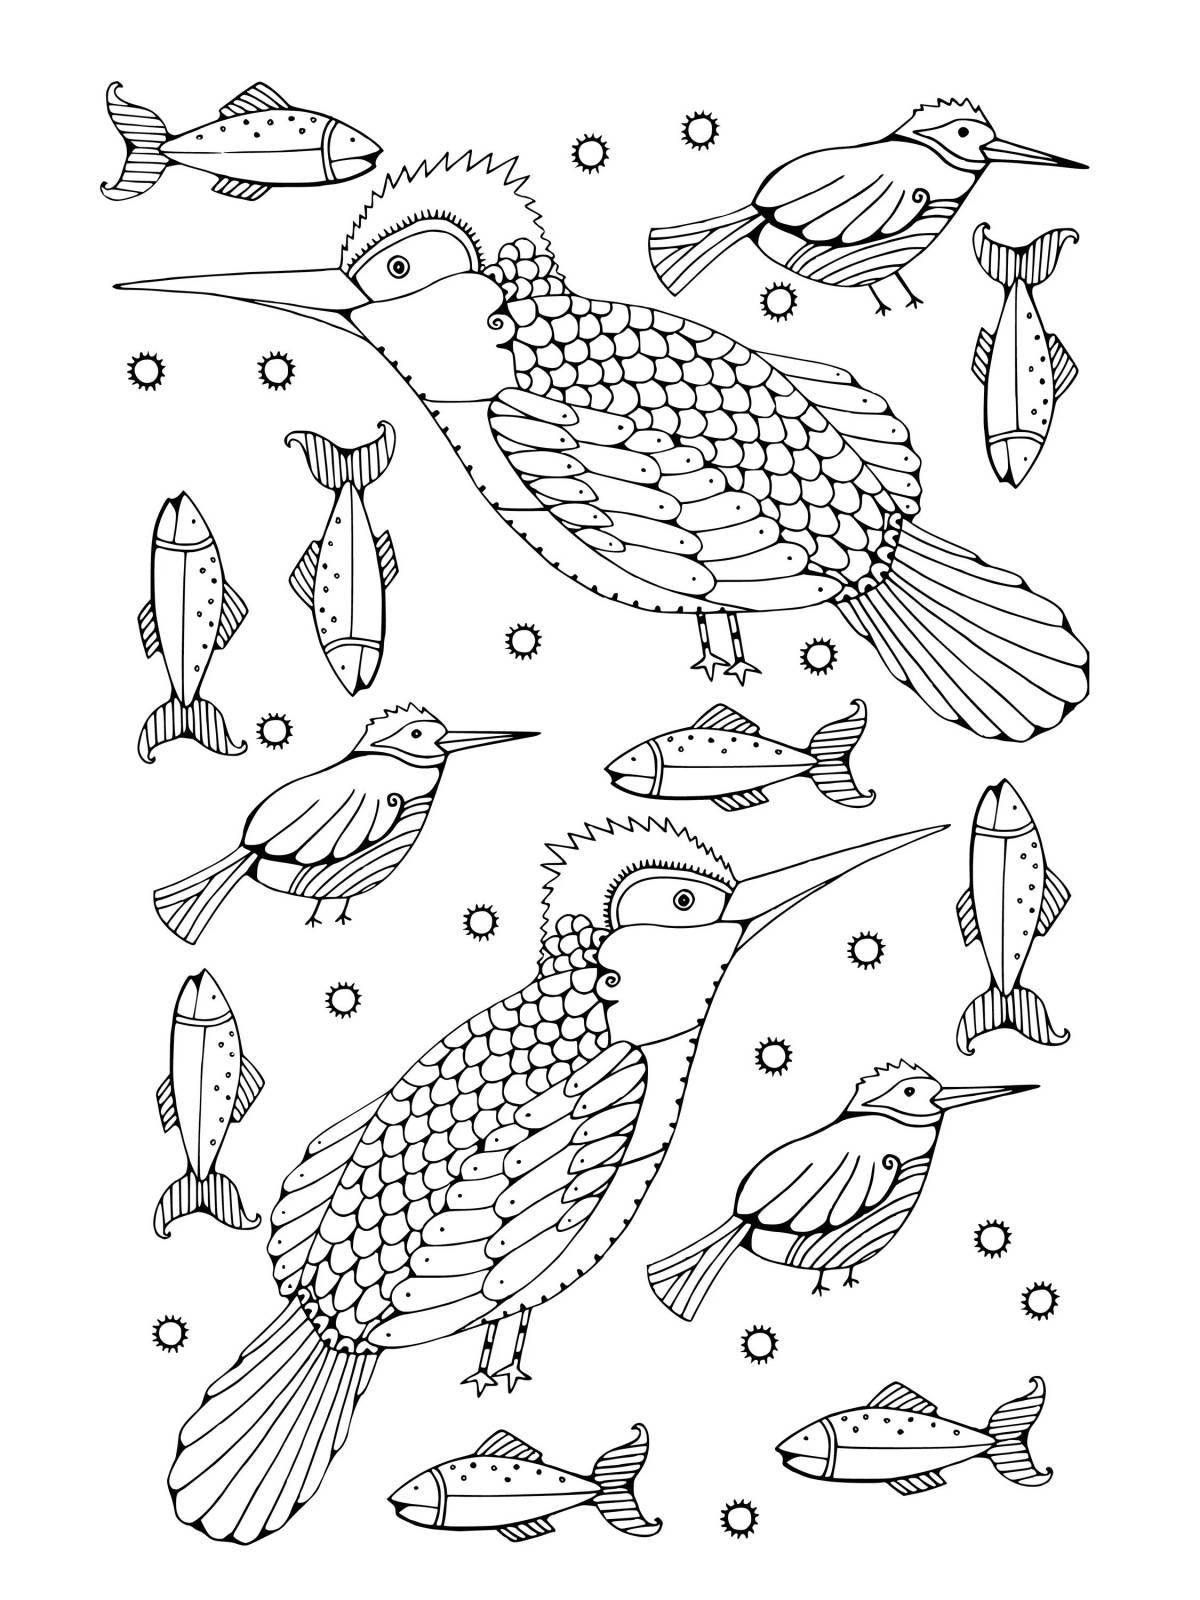 Adorable kingfisher coloring page